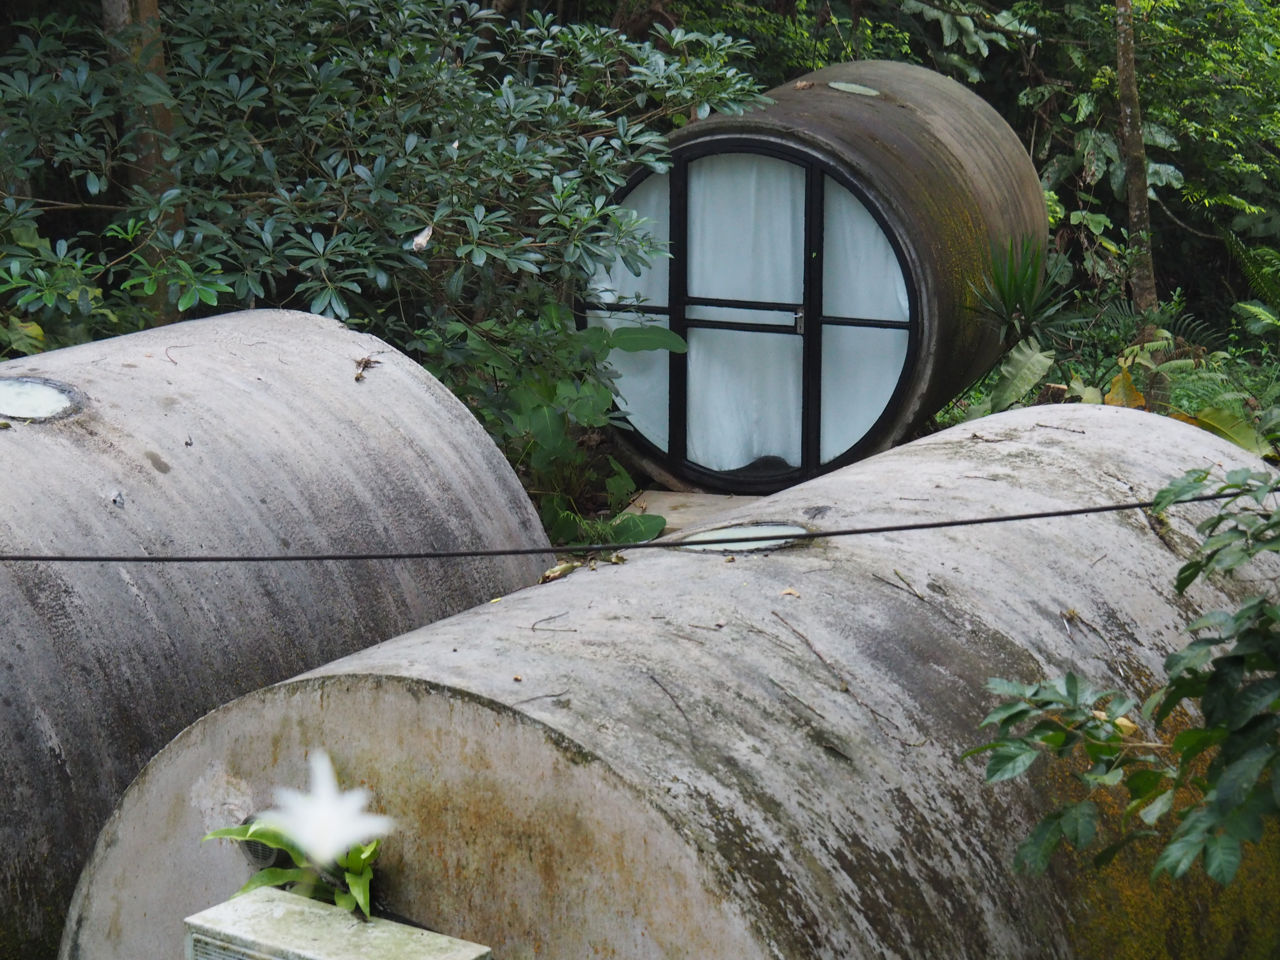 The capsules at Time Capsule Retreat - these are concrete cylinder pipes converted into mini bedrooms - each have a double bed in